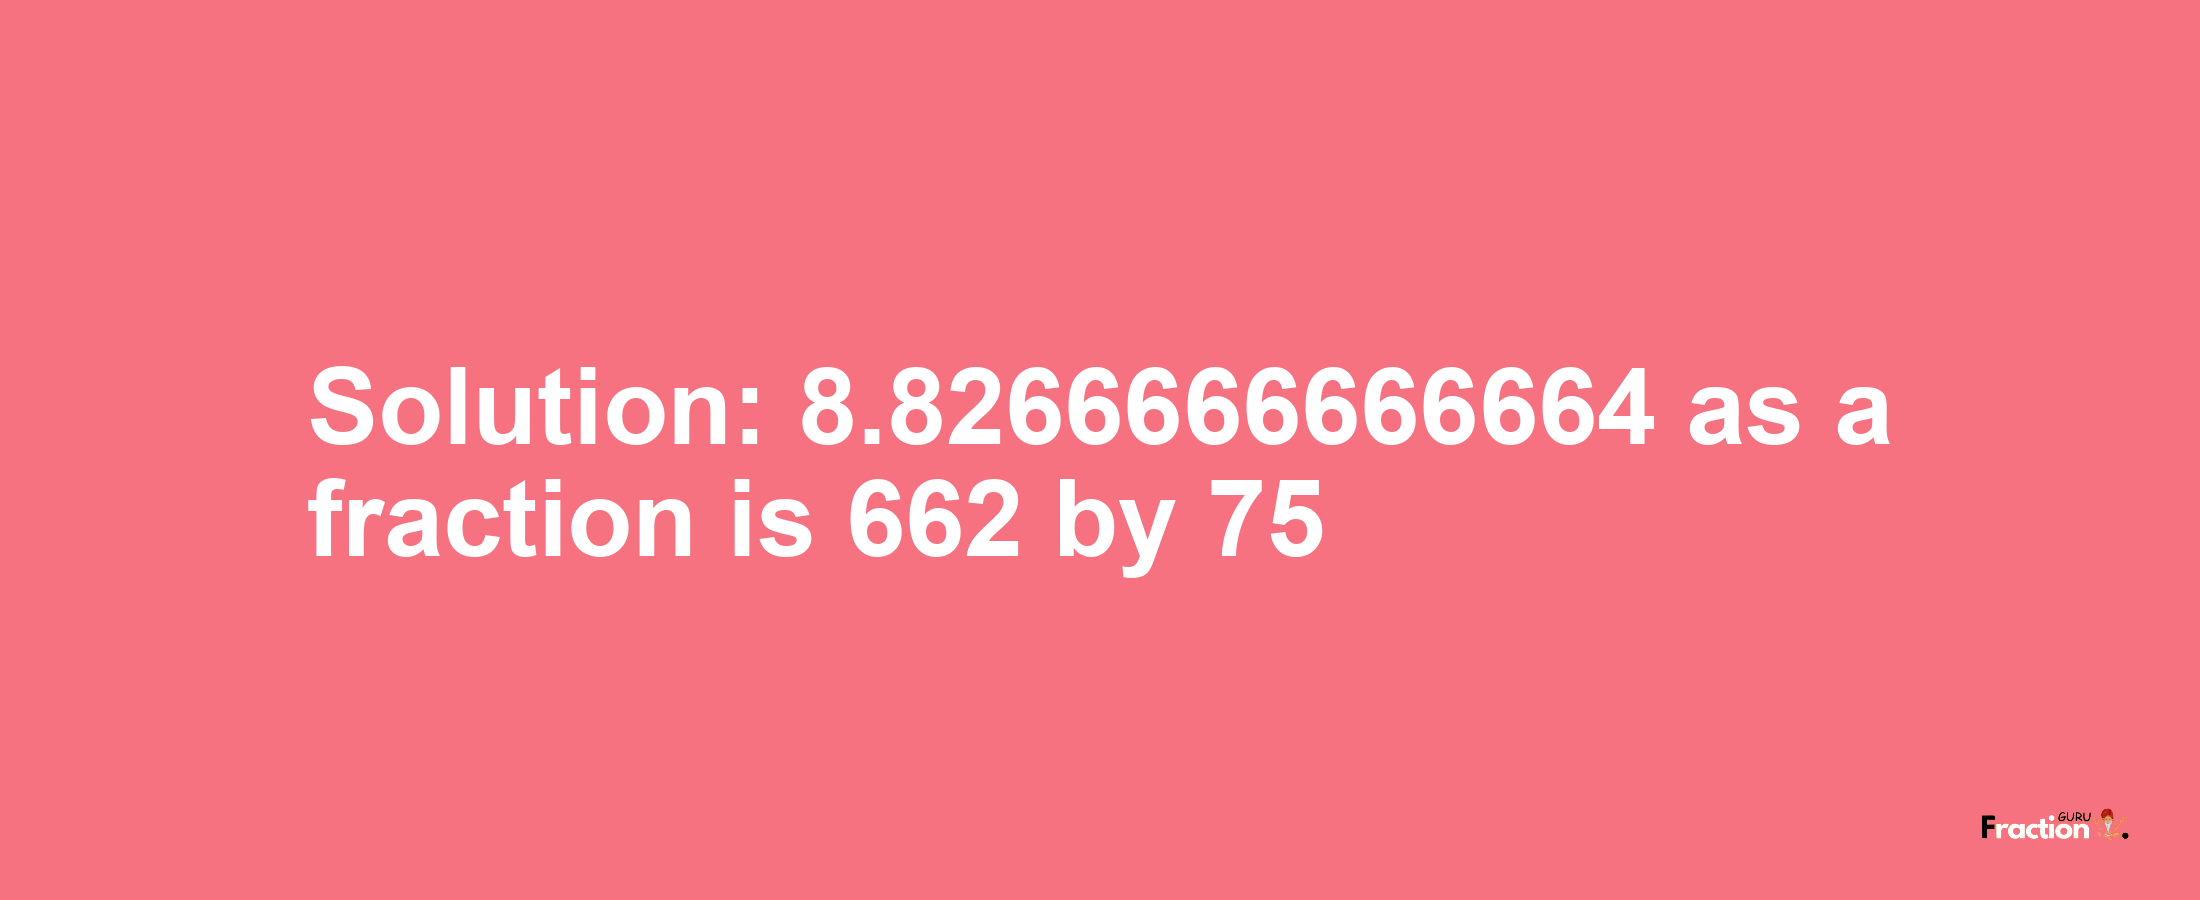 Solution:8.8266666666664 as a fraction is 662/75